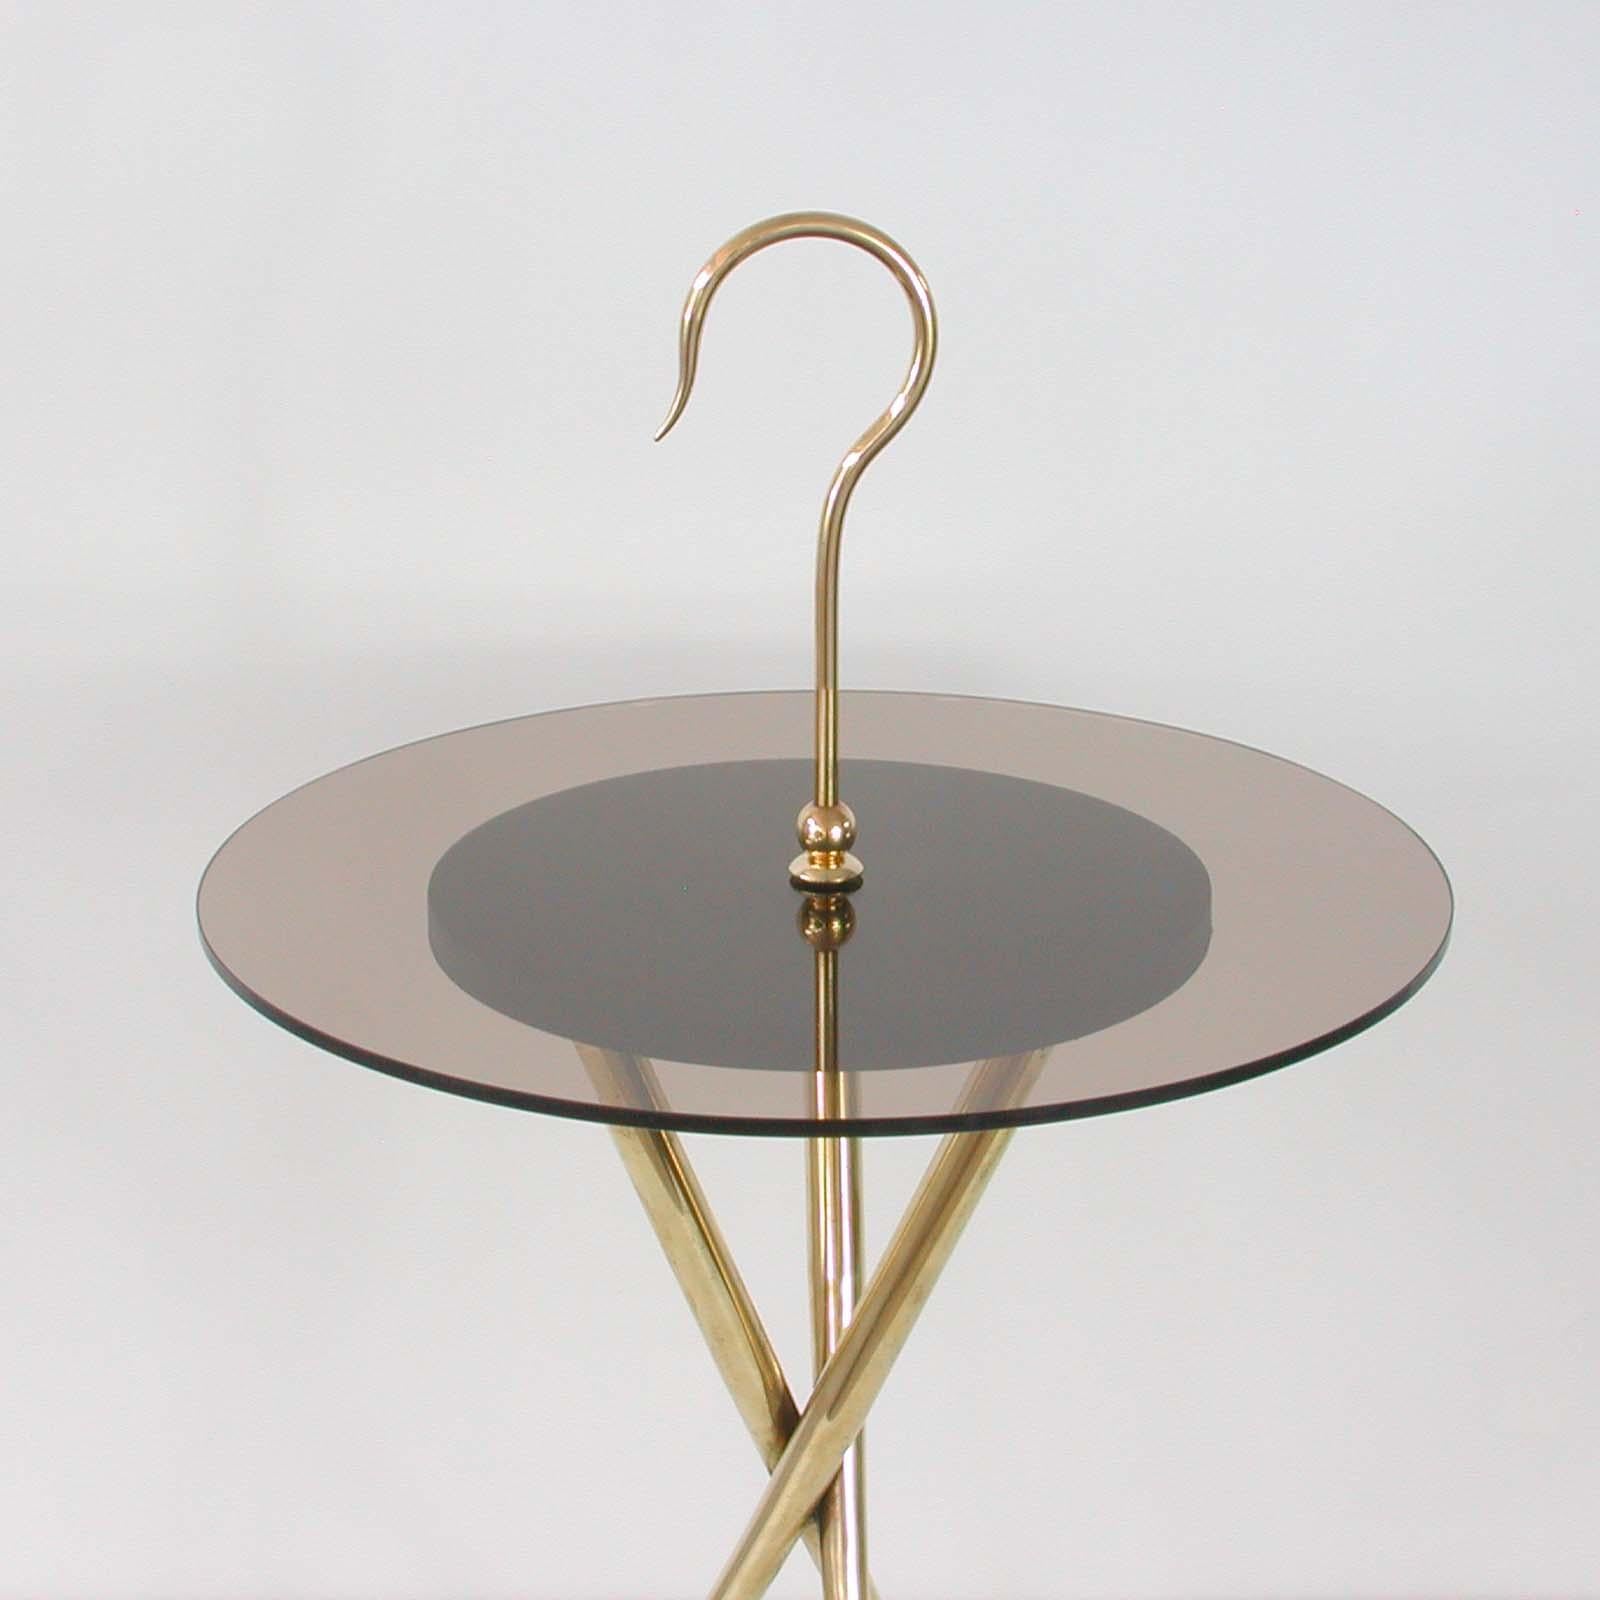 Mid-Century Modern Italian Midcentury Brass and Tinted Glass Occasional Table, 1950s For Sale